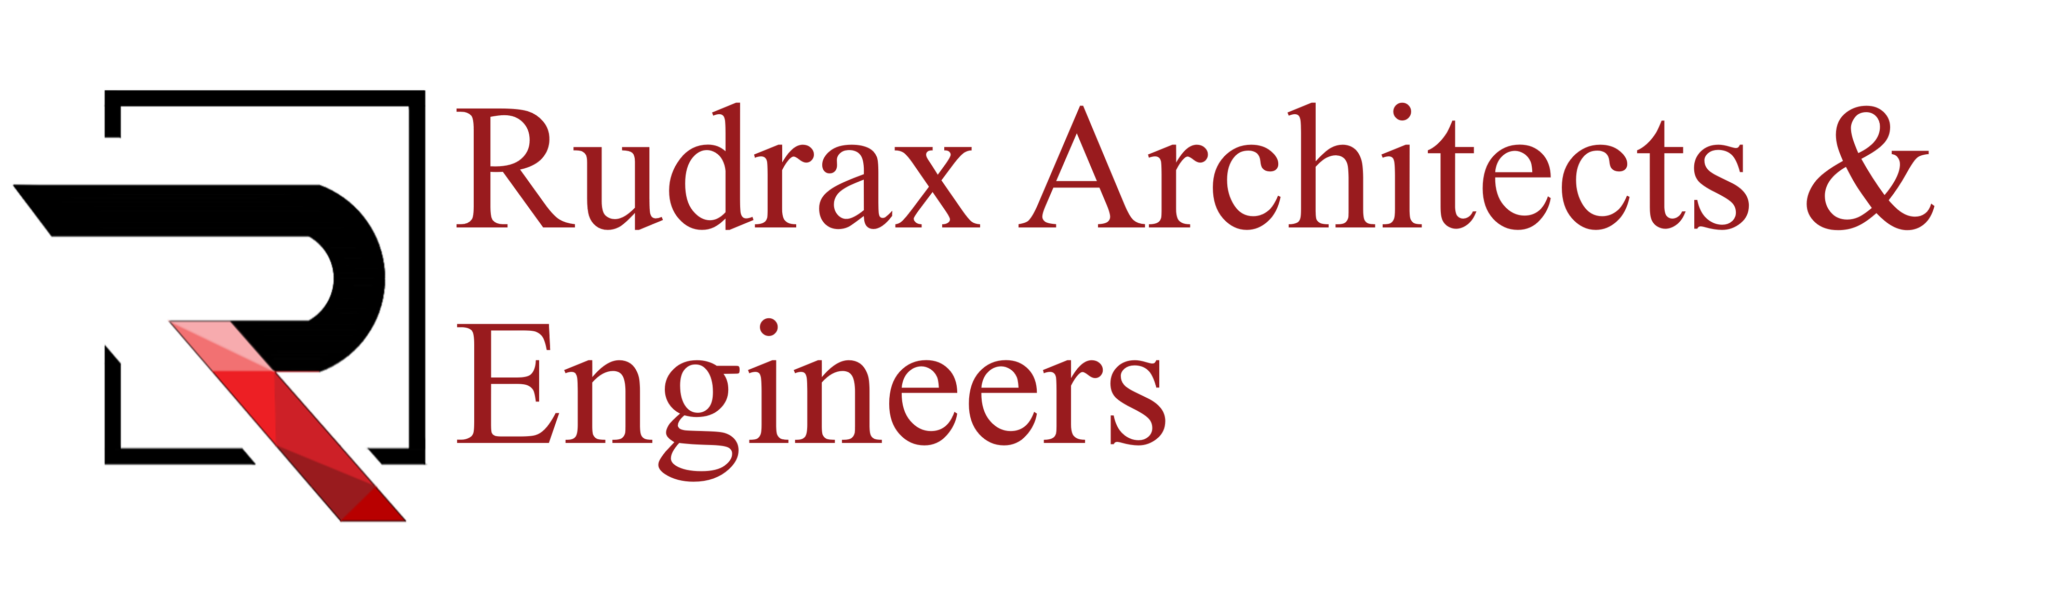 rudraxarchitects